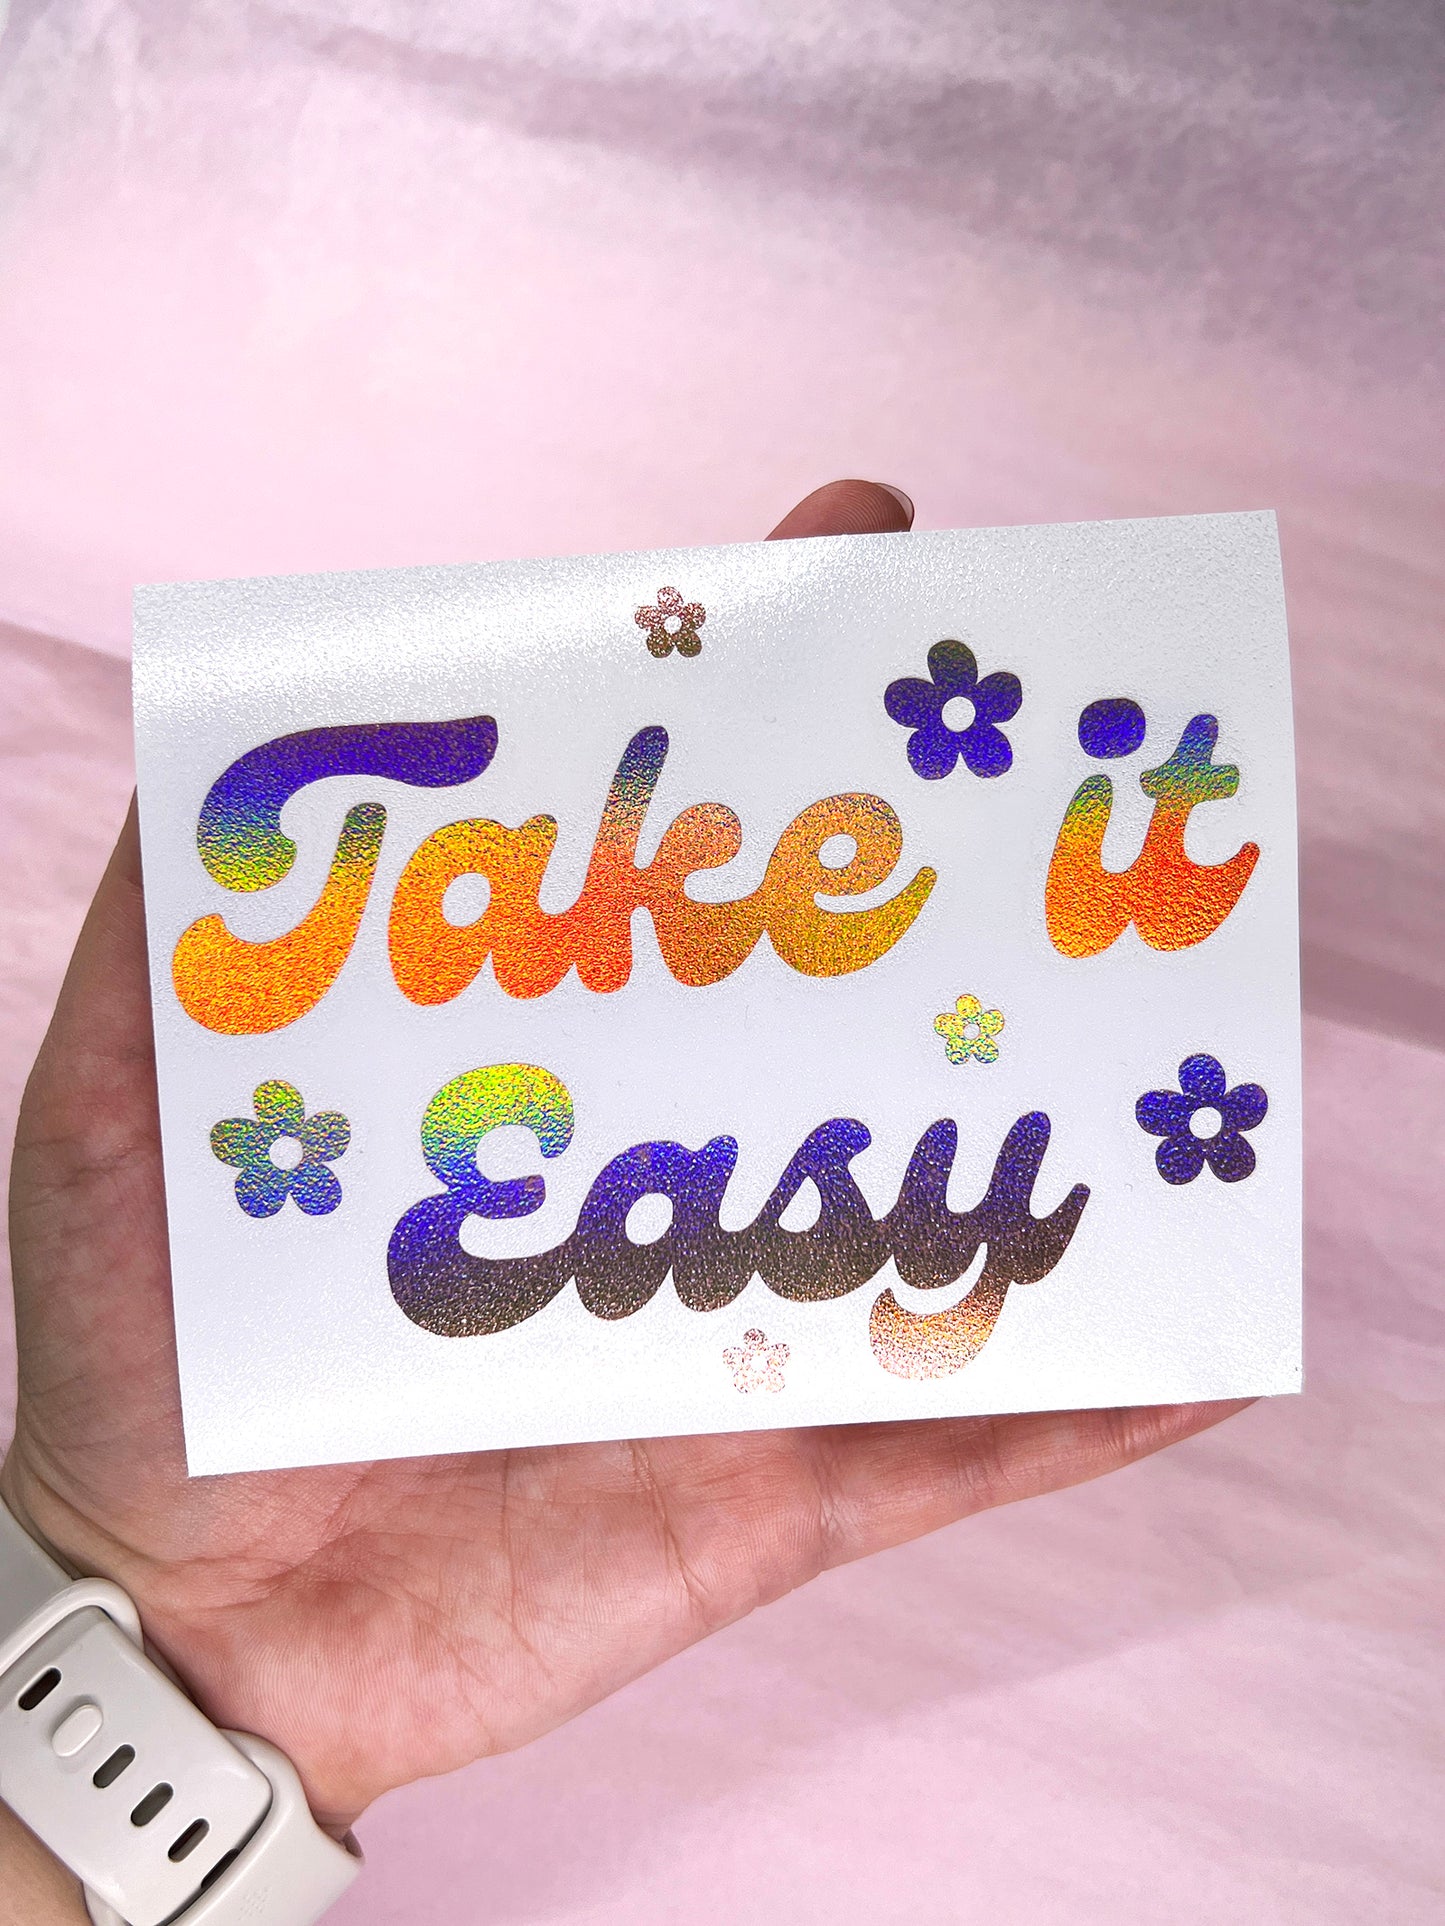 Take it Easy Decal